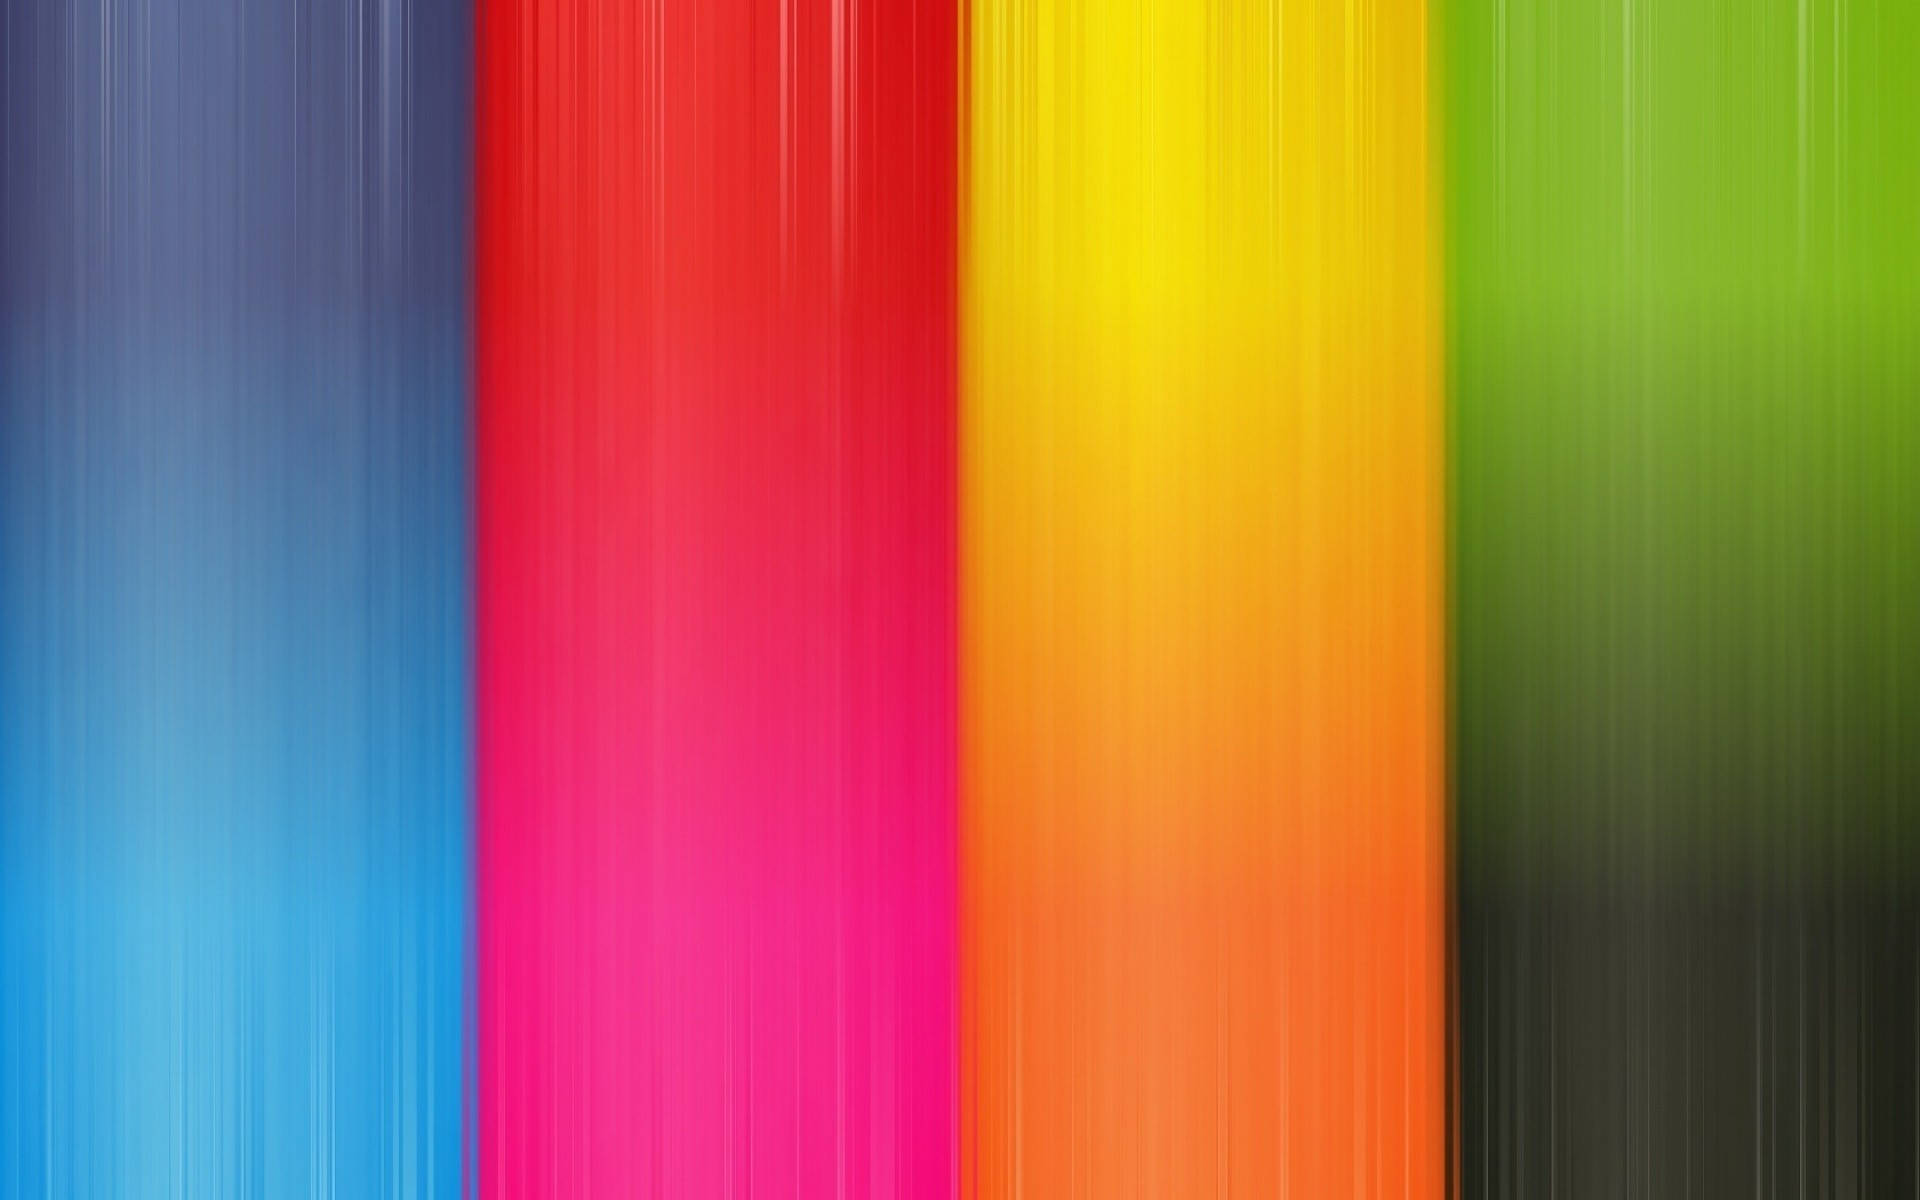 Vertical Rainbow Stripes With Brush Textures Wallpaper